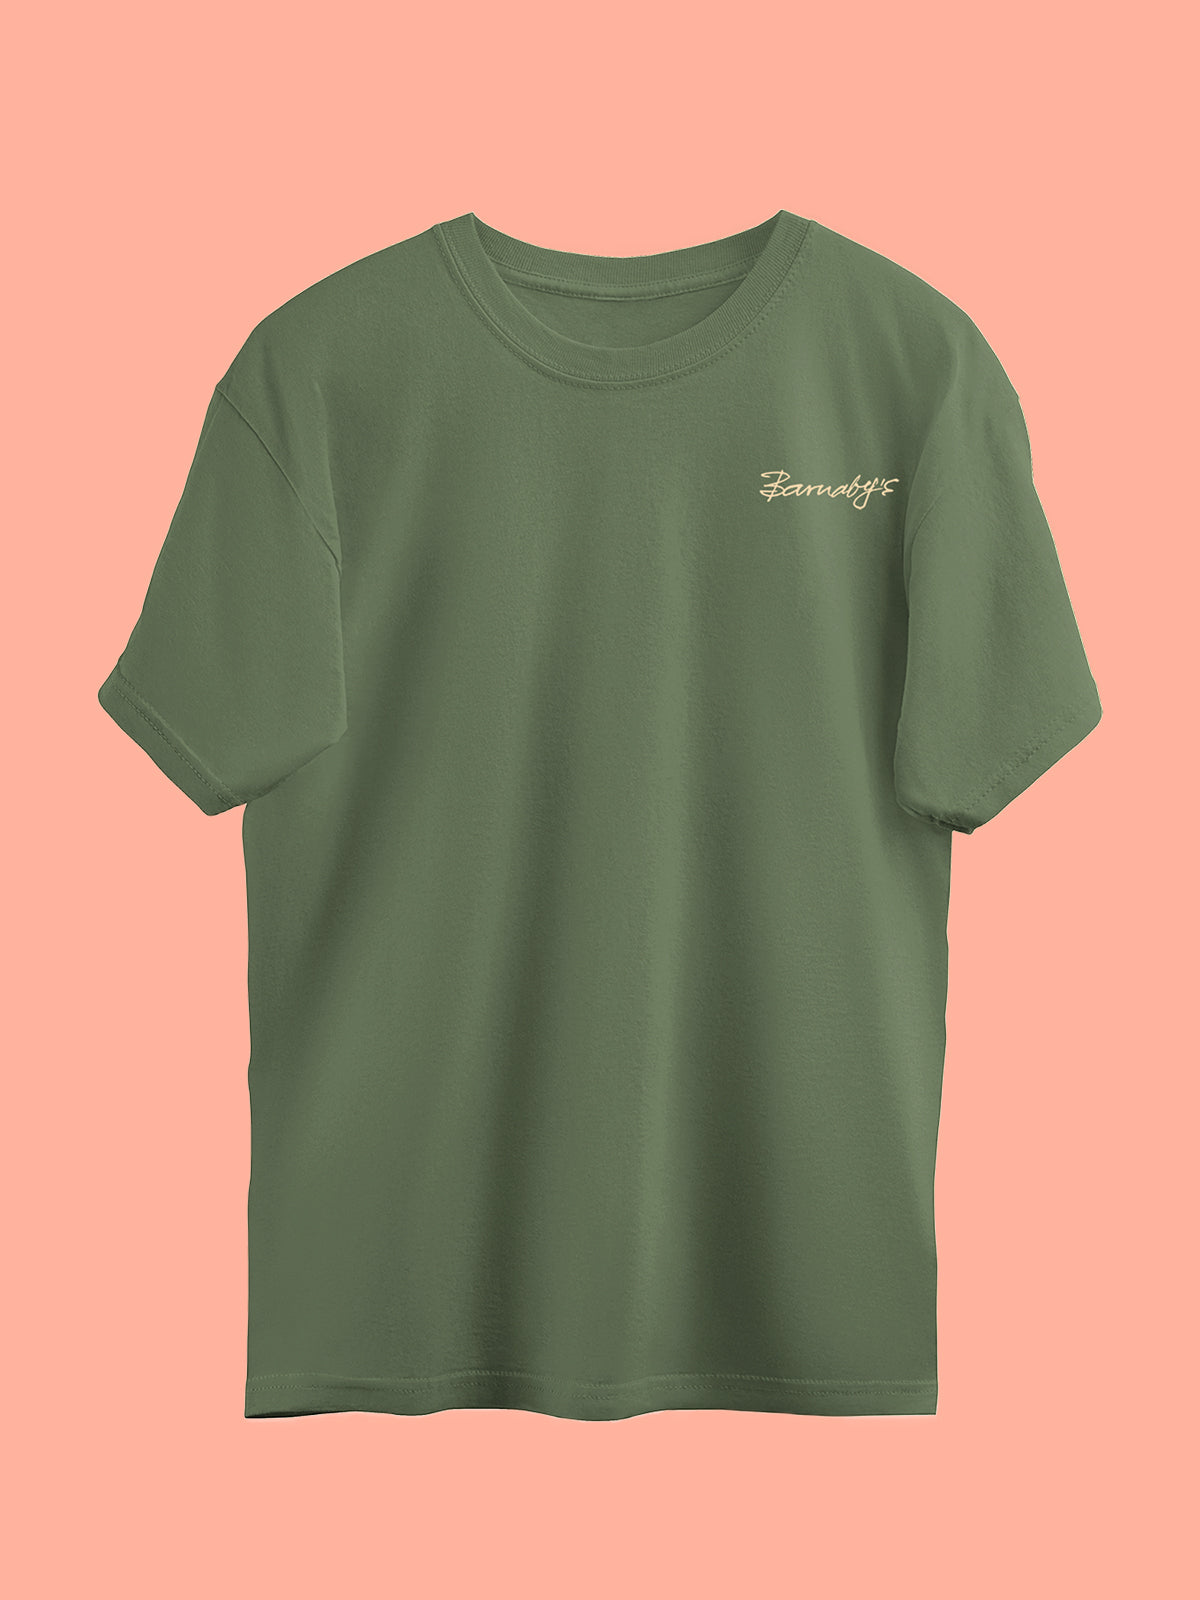 Barnaby's 'Save the Bees' Illustrated Cotton T-shirt (Olive Green)